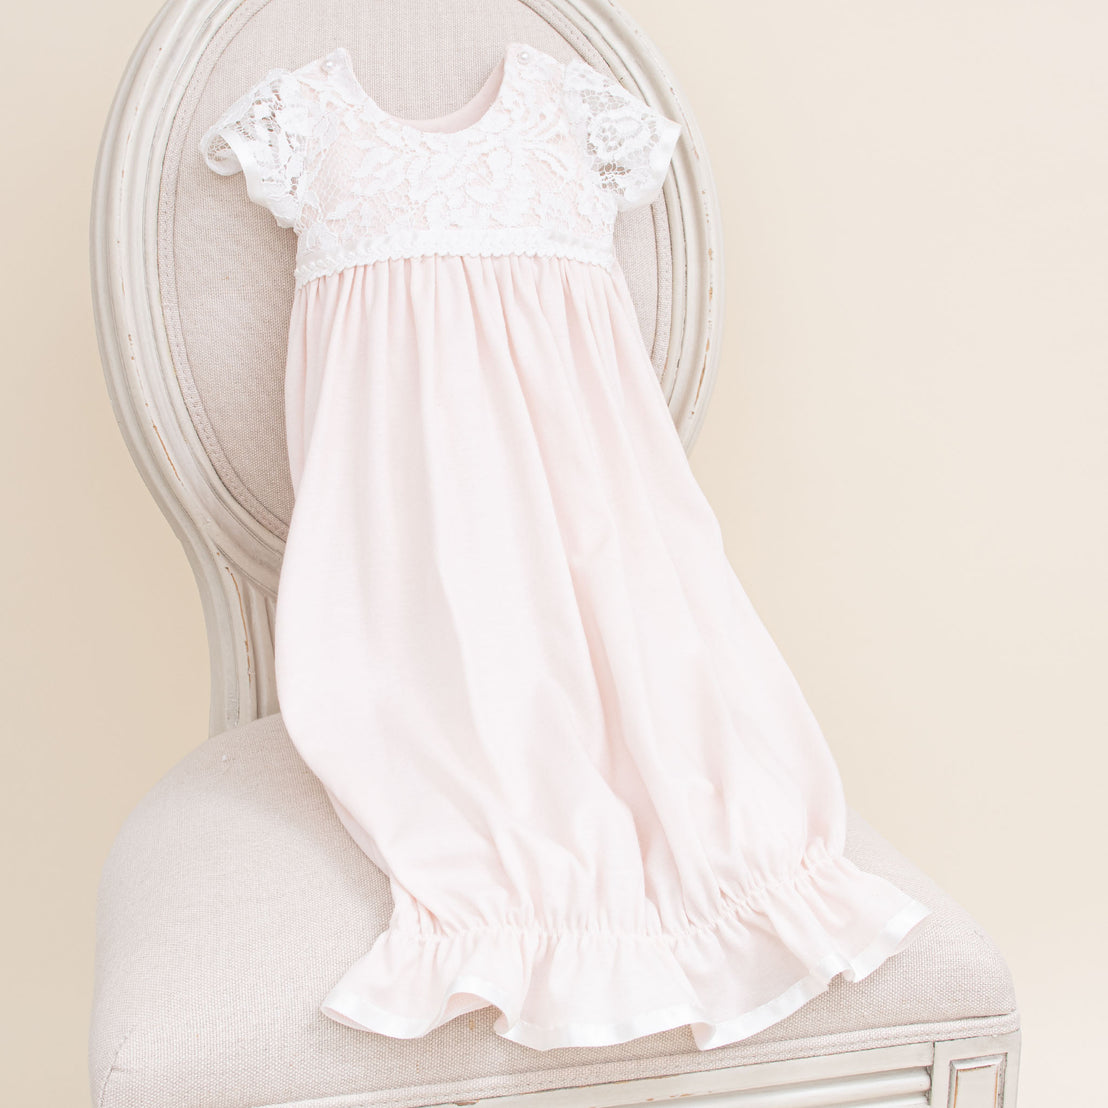 A delicate Rose Layette & Bonnet displayed on an elegant beige upholstered chair.